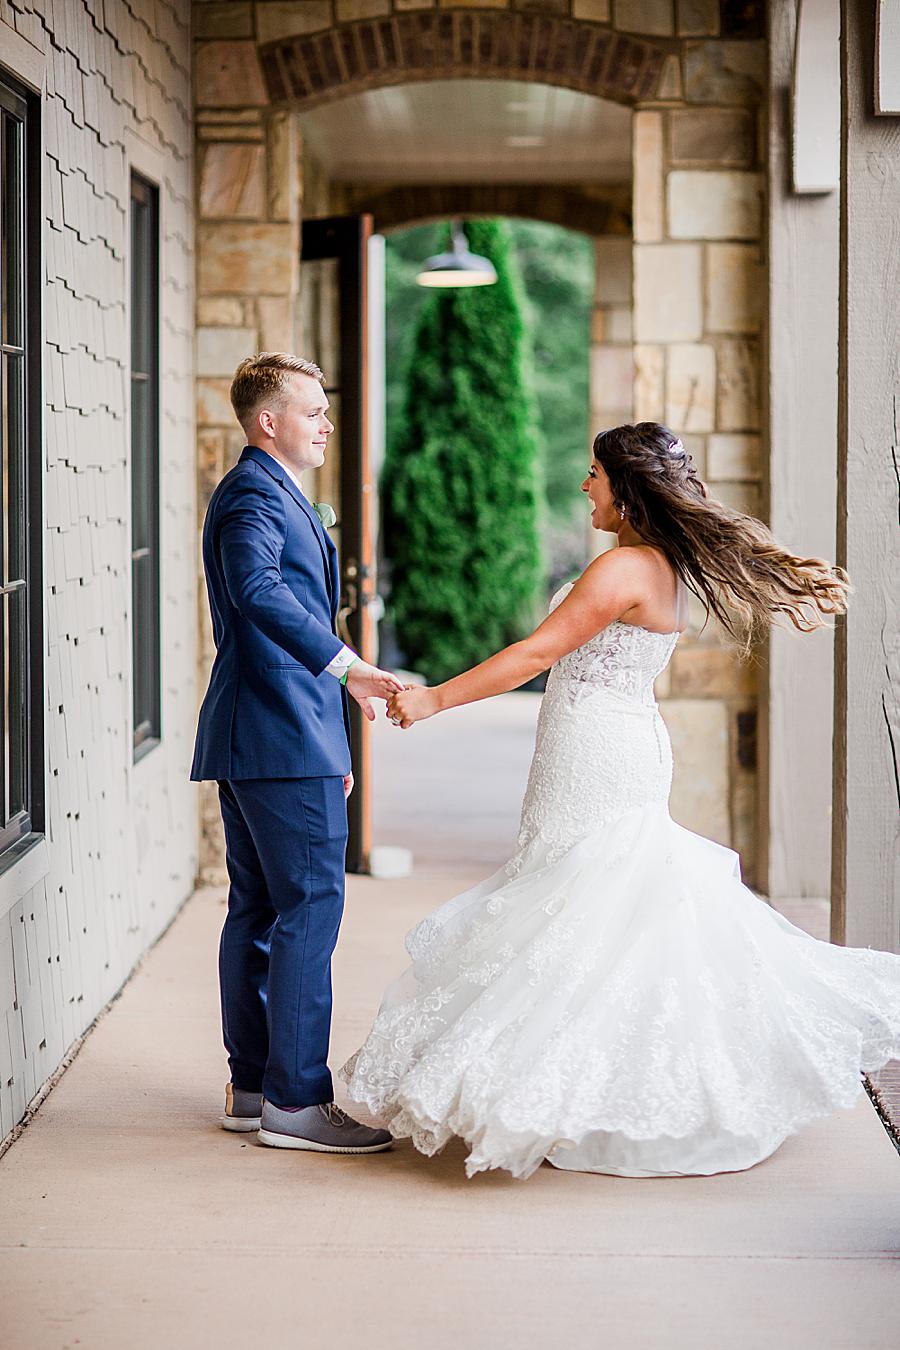 Twirling the bride at this WindRiver Wedding Day by Knoxville Wedding Photographer, Amanda May Photos.